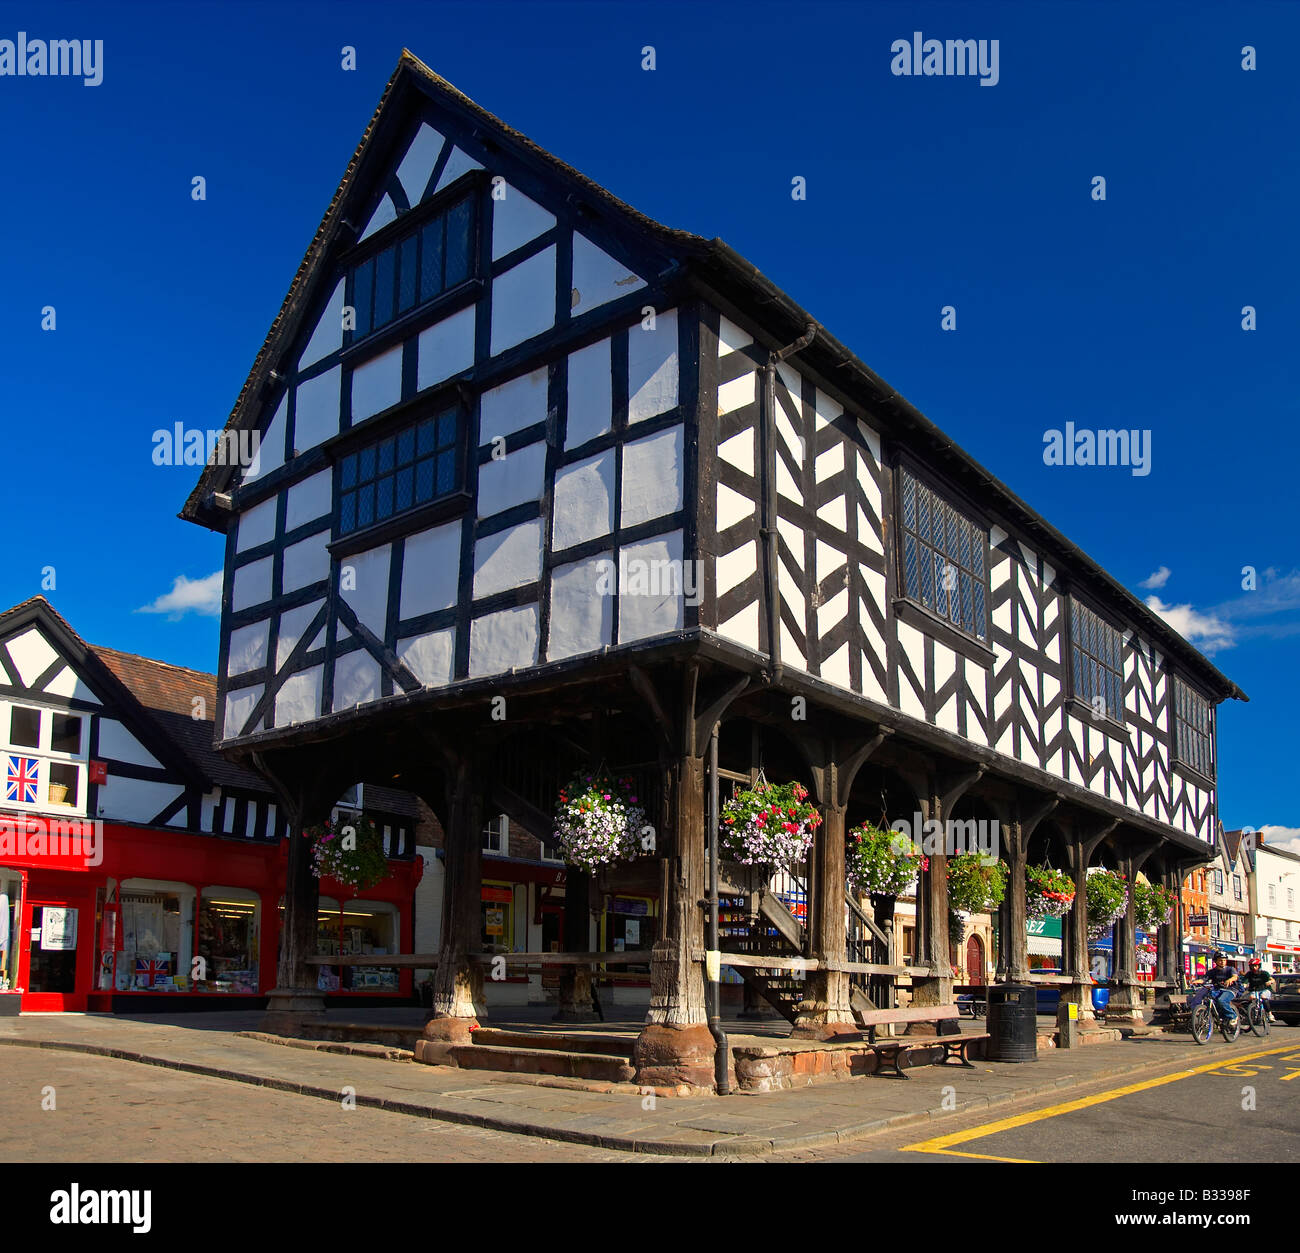 Timber Framed Old Market House in the Historic Town of Ledbury, England, UK Stock Photo